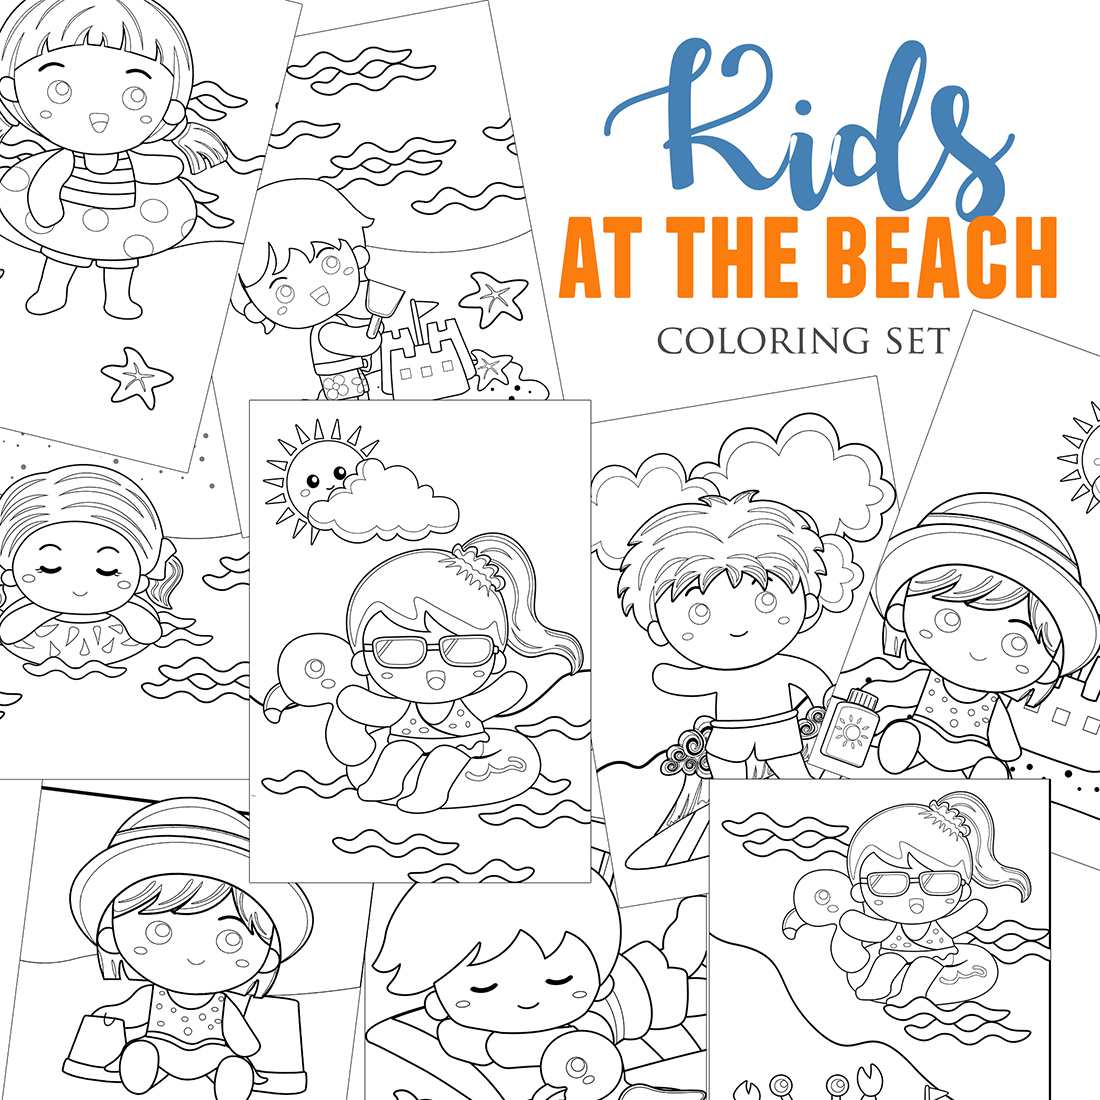 Summer kids at the beach holiday coloring pages activity for kids and adult